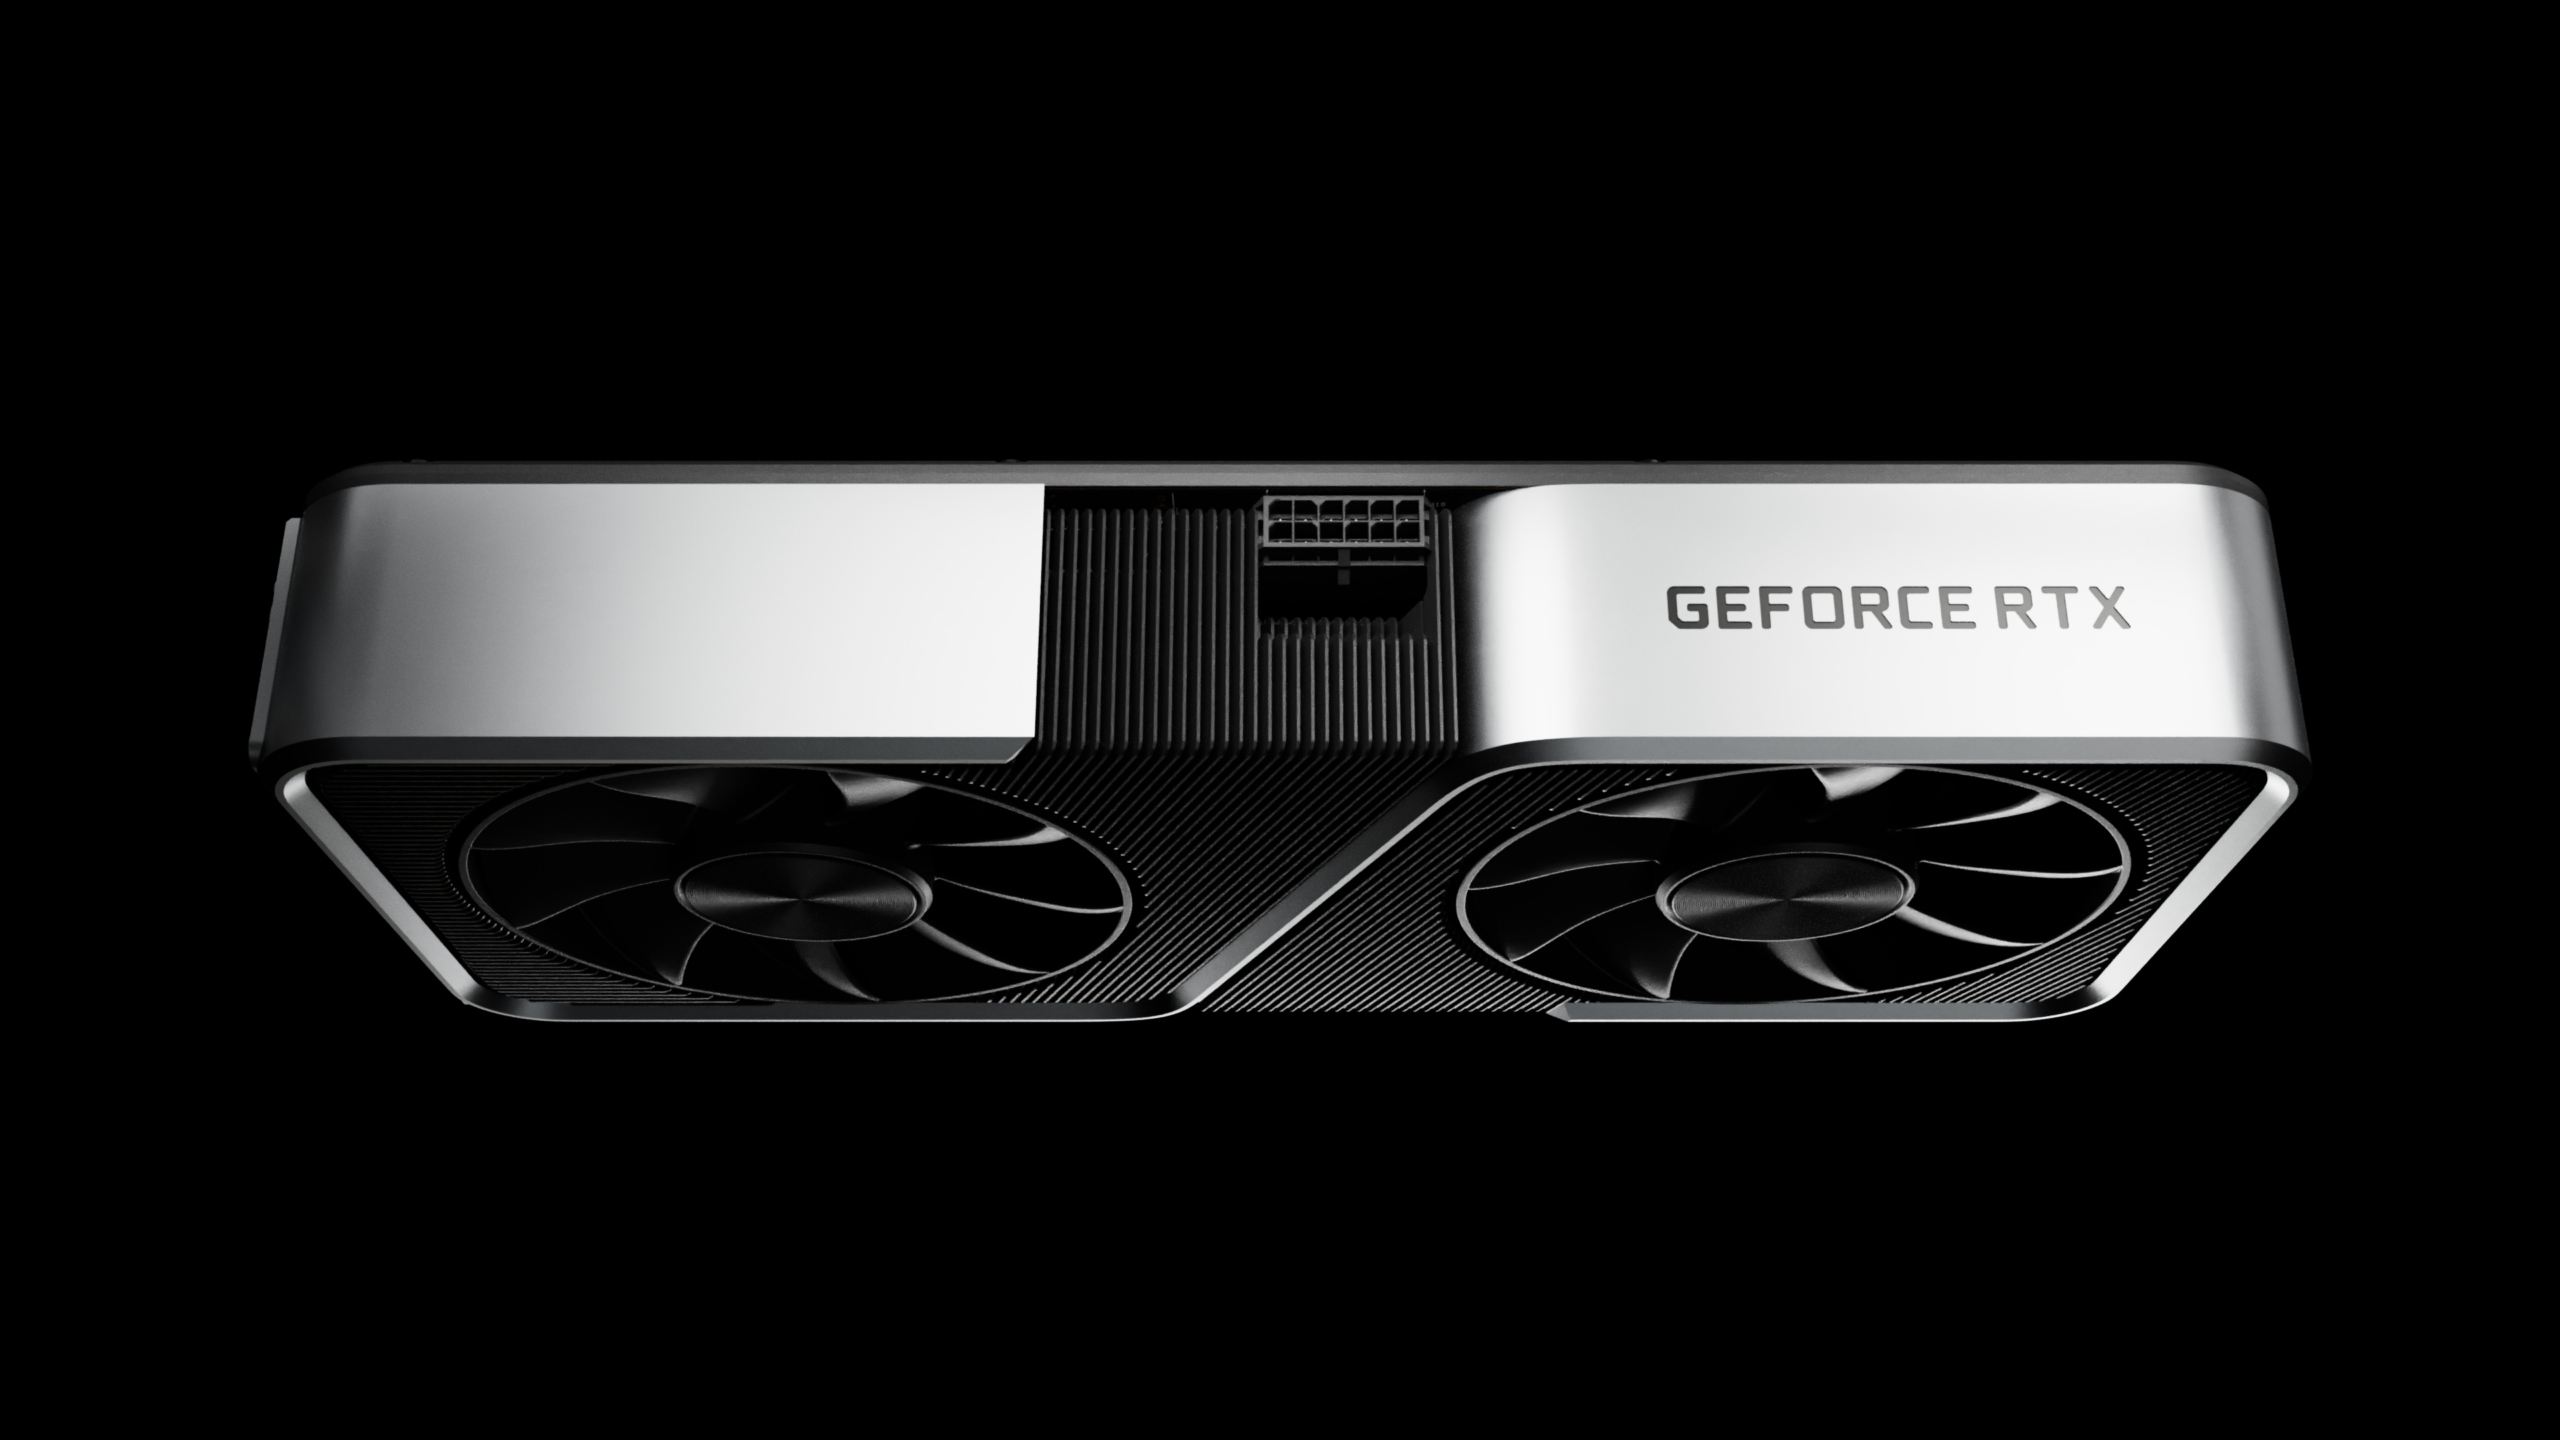 Nvidia GeForce RTX 3060 Ti review: faster than 2080 Super, easily